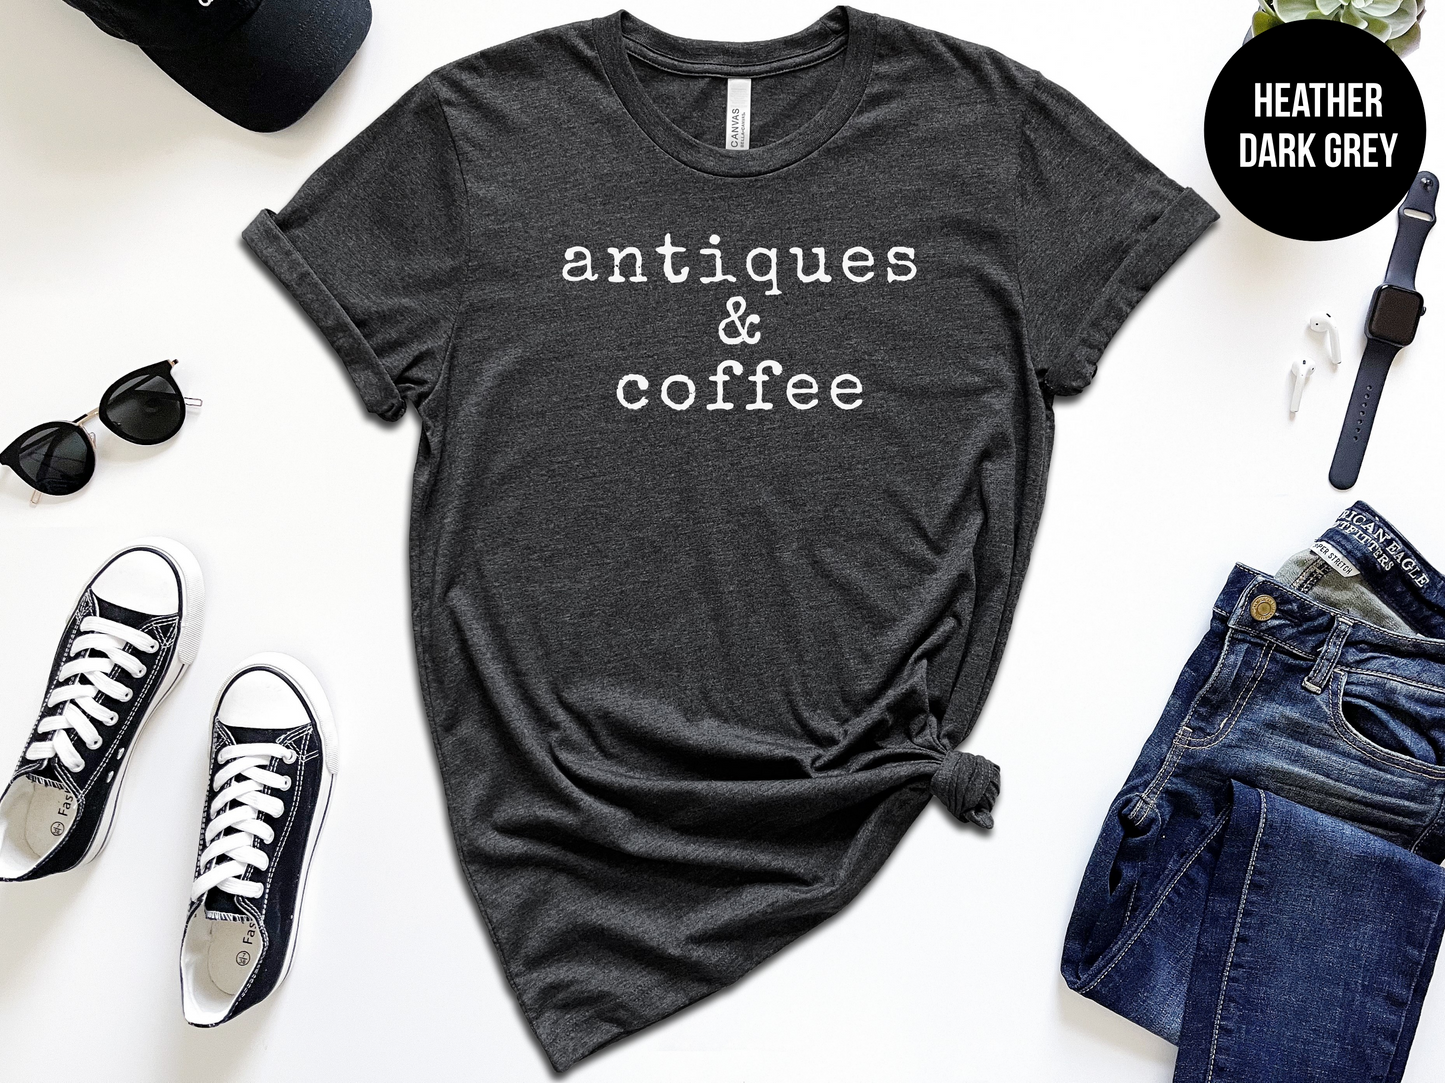 Antiques & Coffee